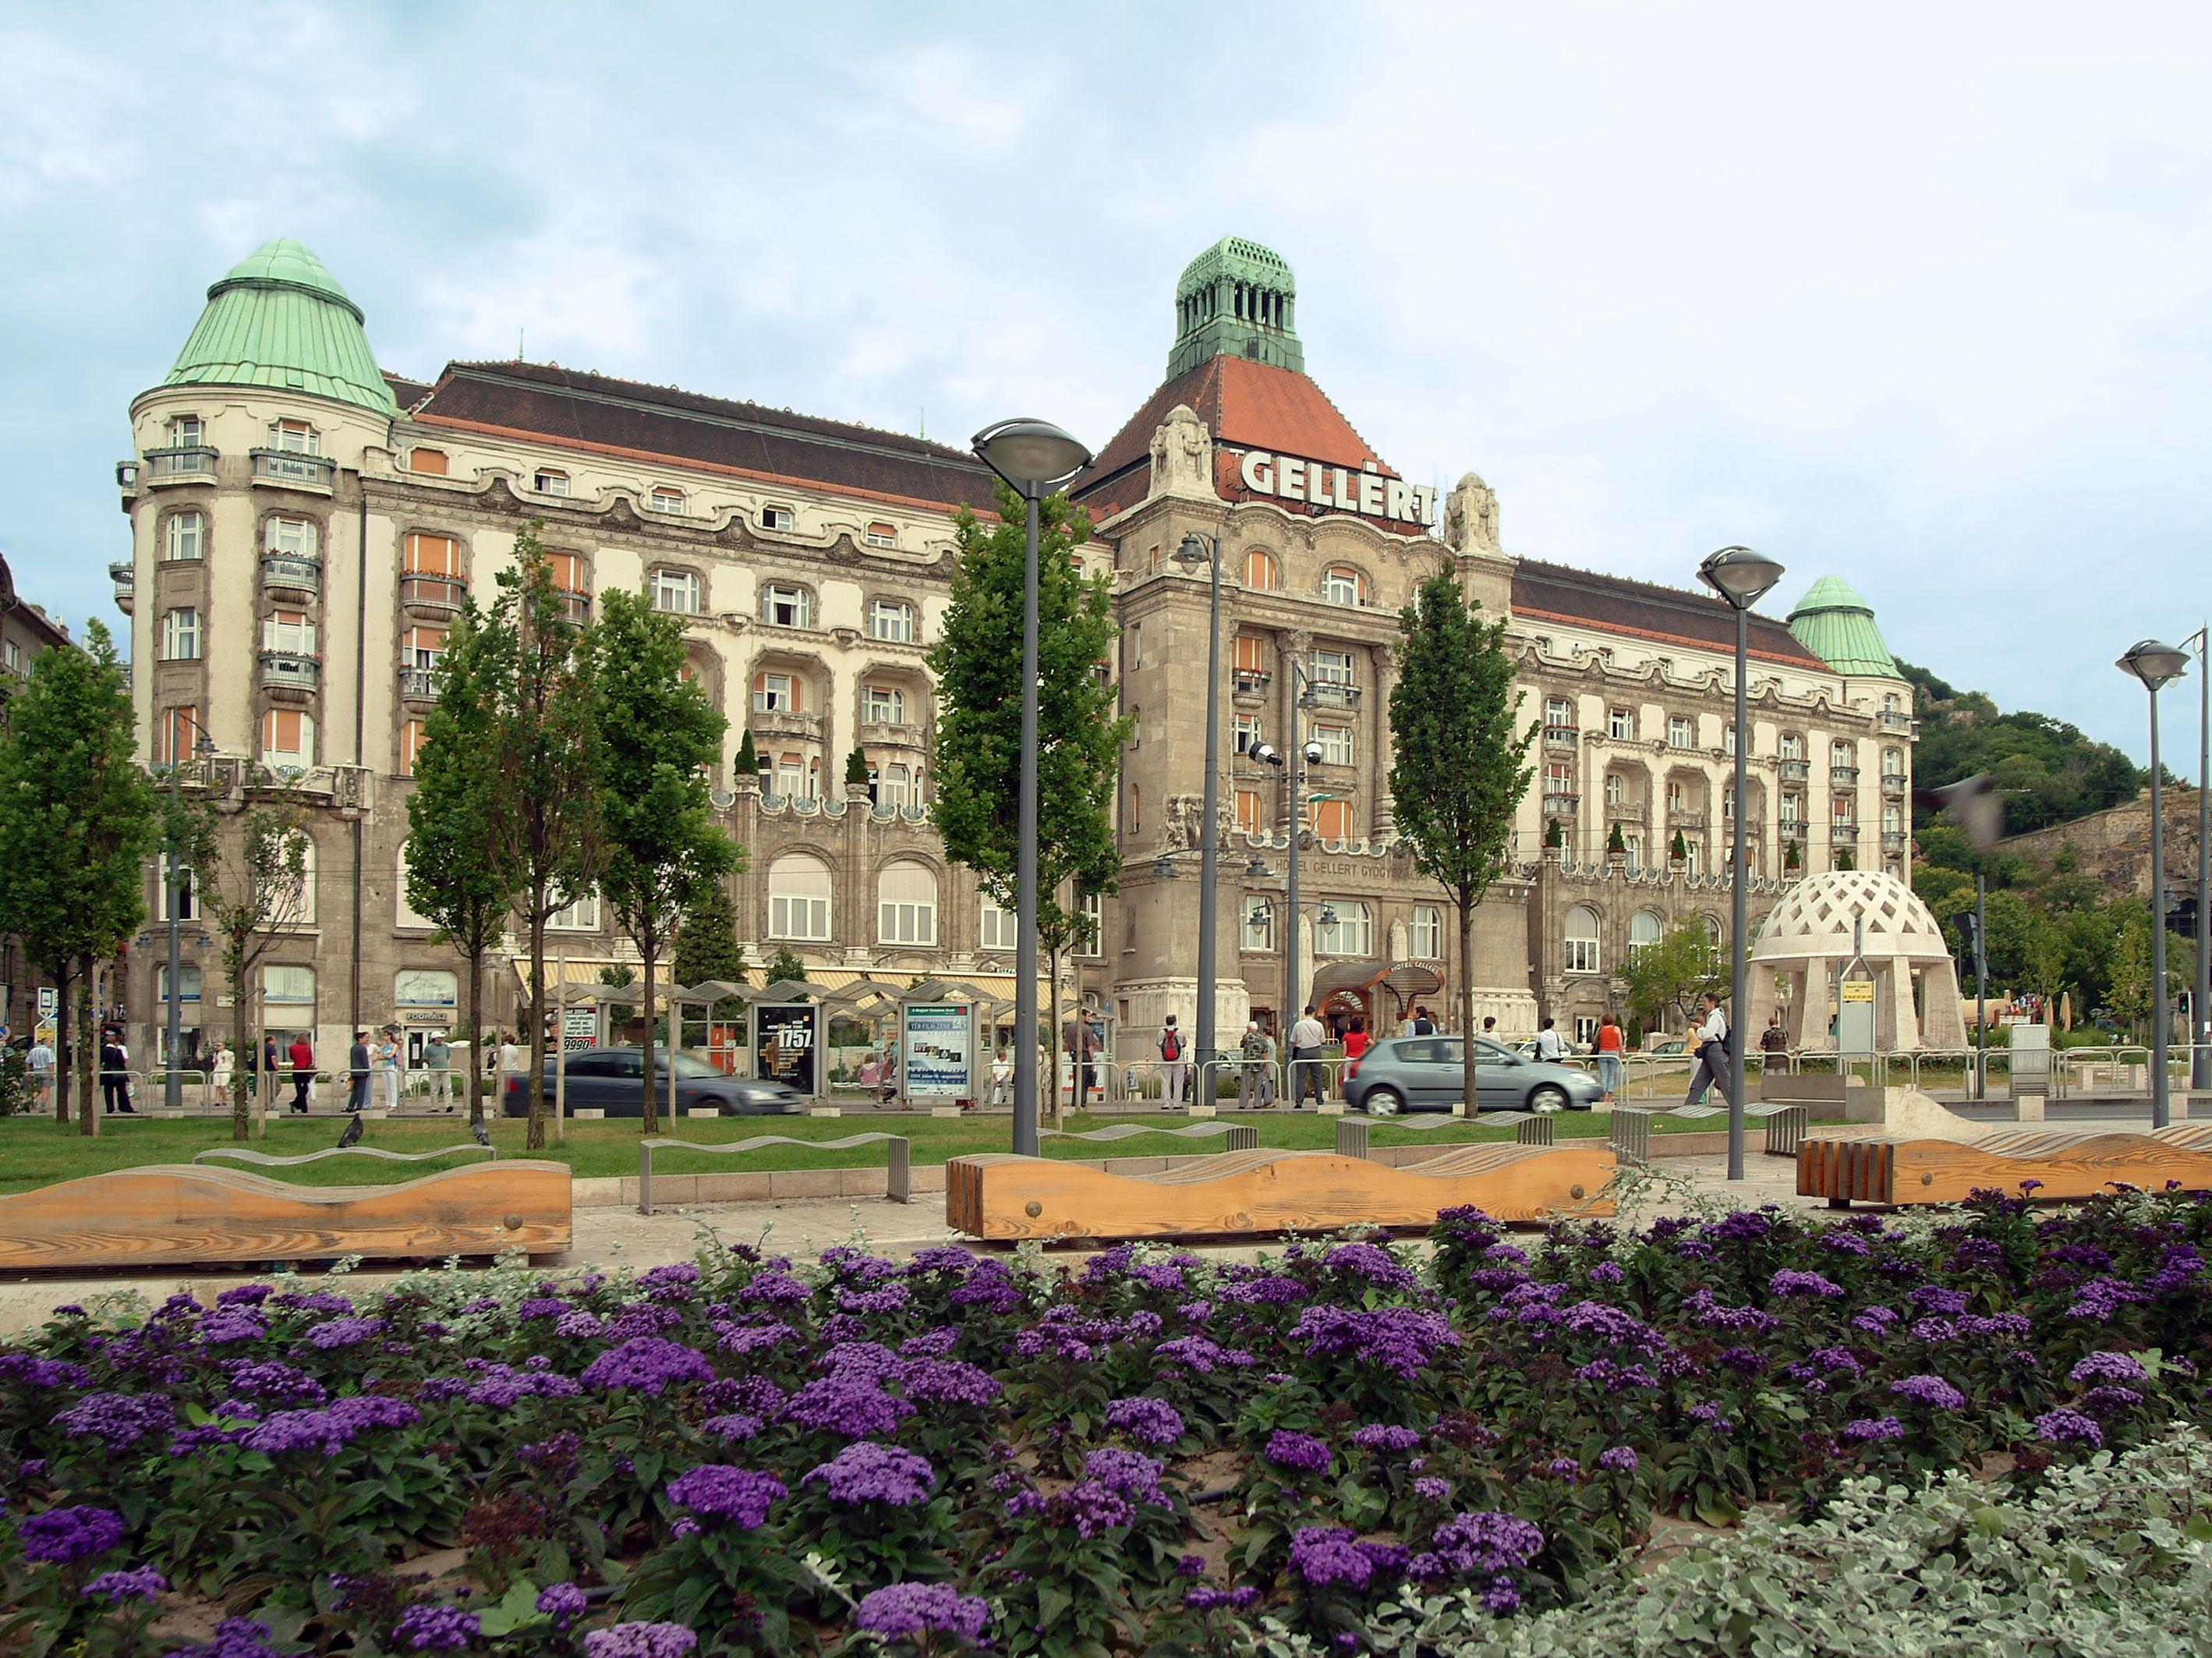 Danubius Hotel Gellert Budapest FAQ 2017, What facilities are there in Danubius Hotel Gellert Budapest 2017, What Languages Spoken are Supported in Danubius Hotel Gellert Budapest 2017, Which payment cards are accepted in Danubius Hotel Gellert Budapest , Budapest Danubius Hotel Gellert room facilities and services Q&A 2017, Budapest Danubius Hotel Gellert online booking services 2017, Budapest Danubius Hotel Gellert address 2017, Budapest Danubius Hotel Gellert telephone number 2017,Budapest Danubius Hotel Gellert map 2017, Budapest Danubius Hotel Gellert traffic guide 2017, how to go Budapest Danubius Hotel Gellert, Budapest Danubius Hotel Gellert booking online 2017, Budapest Danubius Hotel Gellert room types 2017.